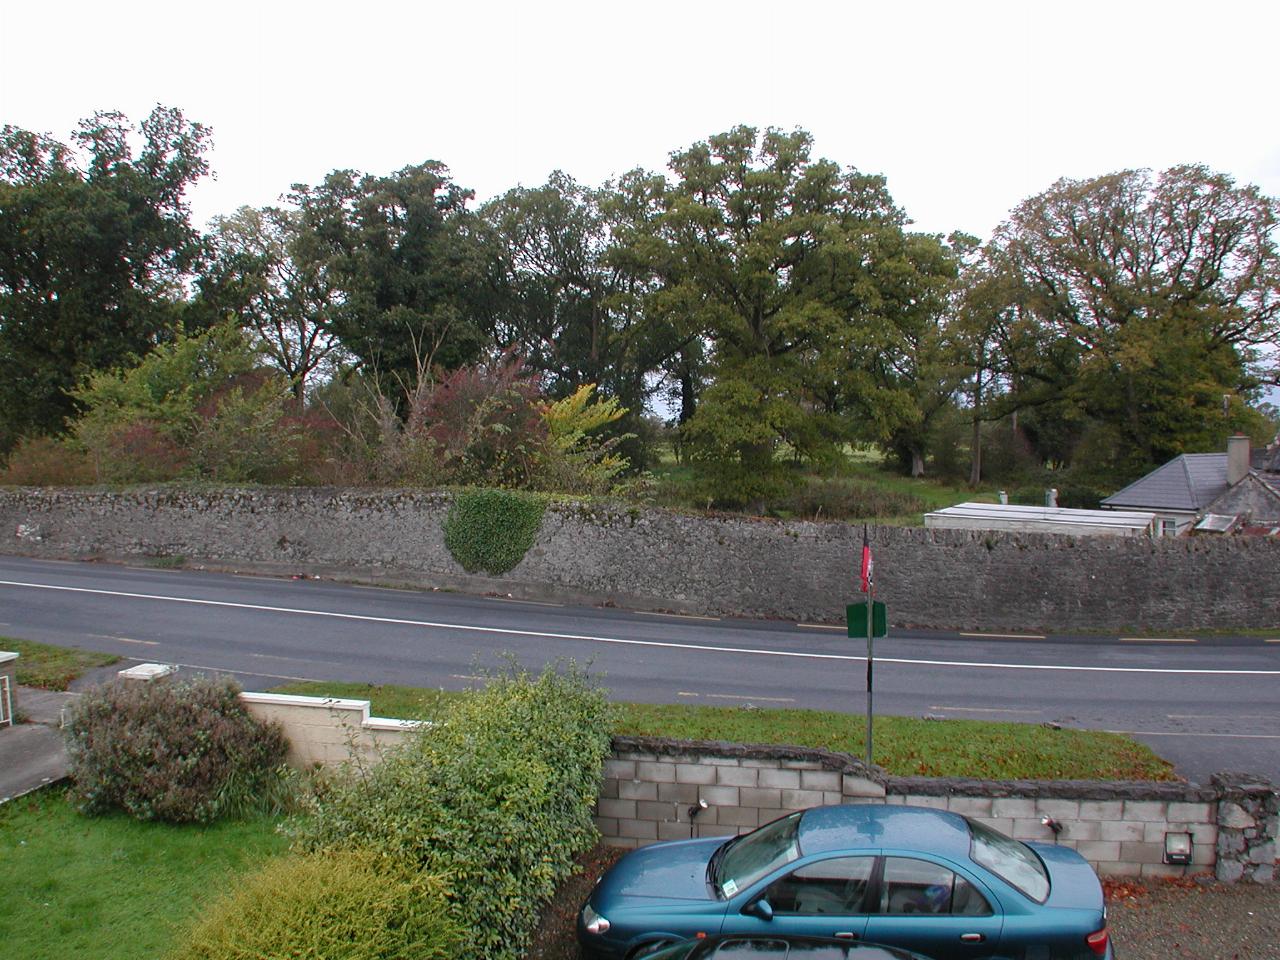 View from my bedroom in Adare - a private home across street!